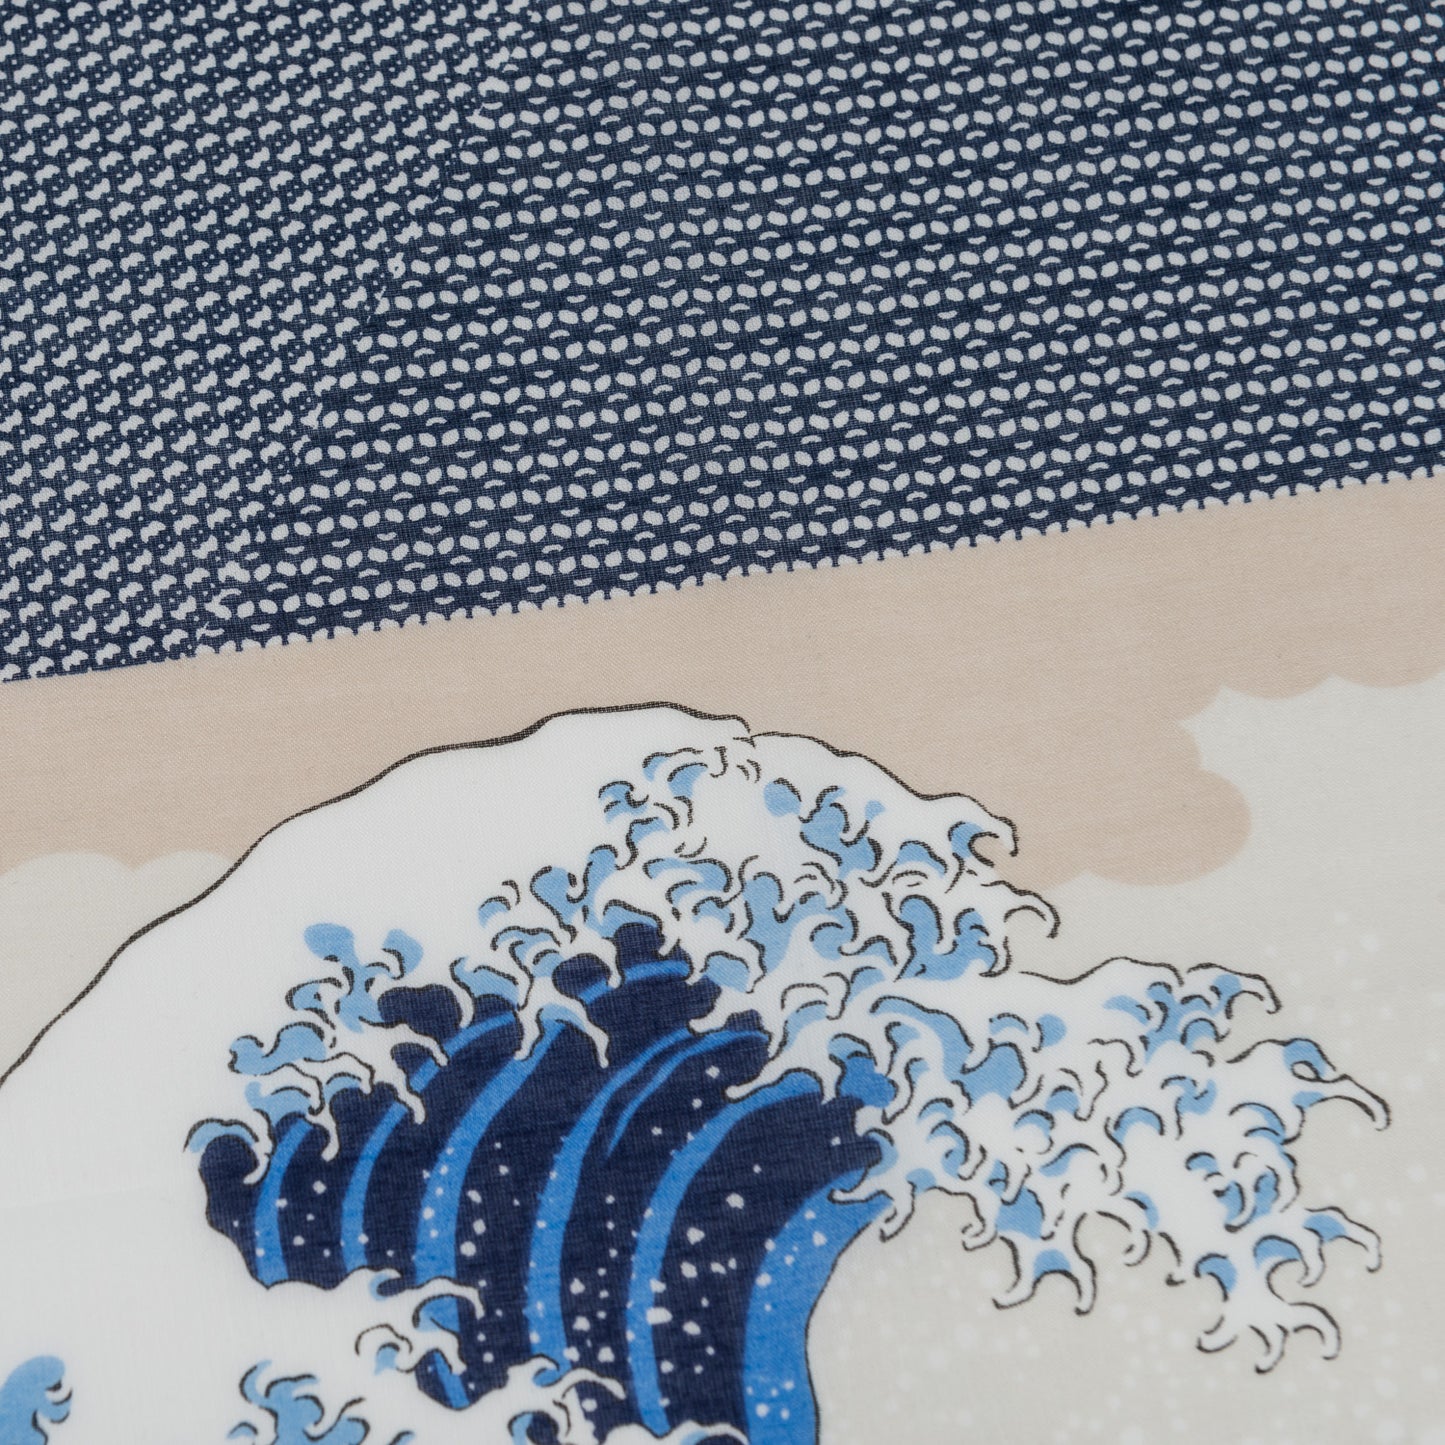 The Great Wave Japanese Handkerchief